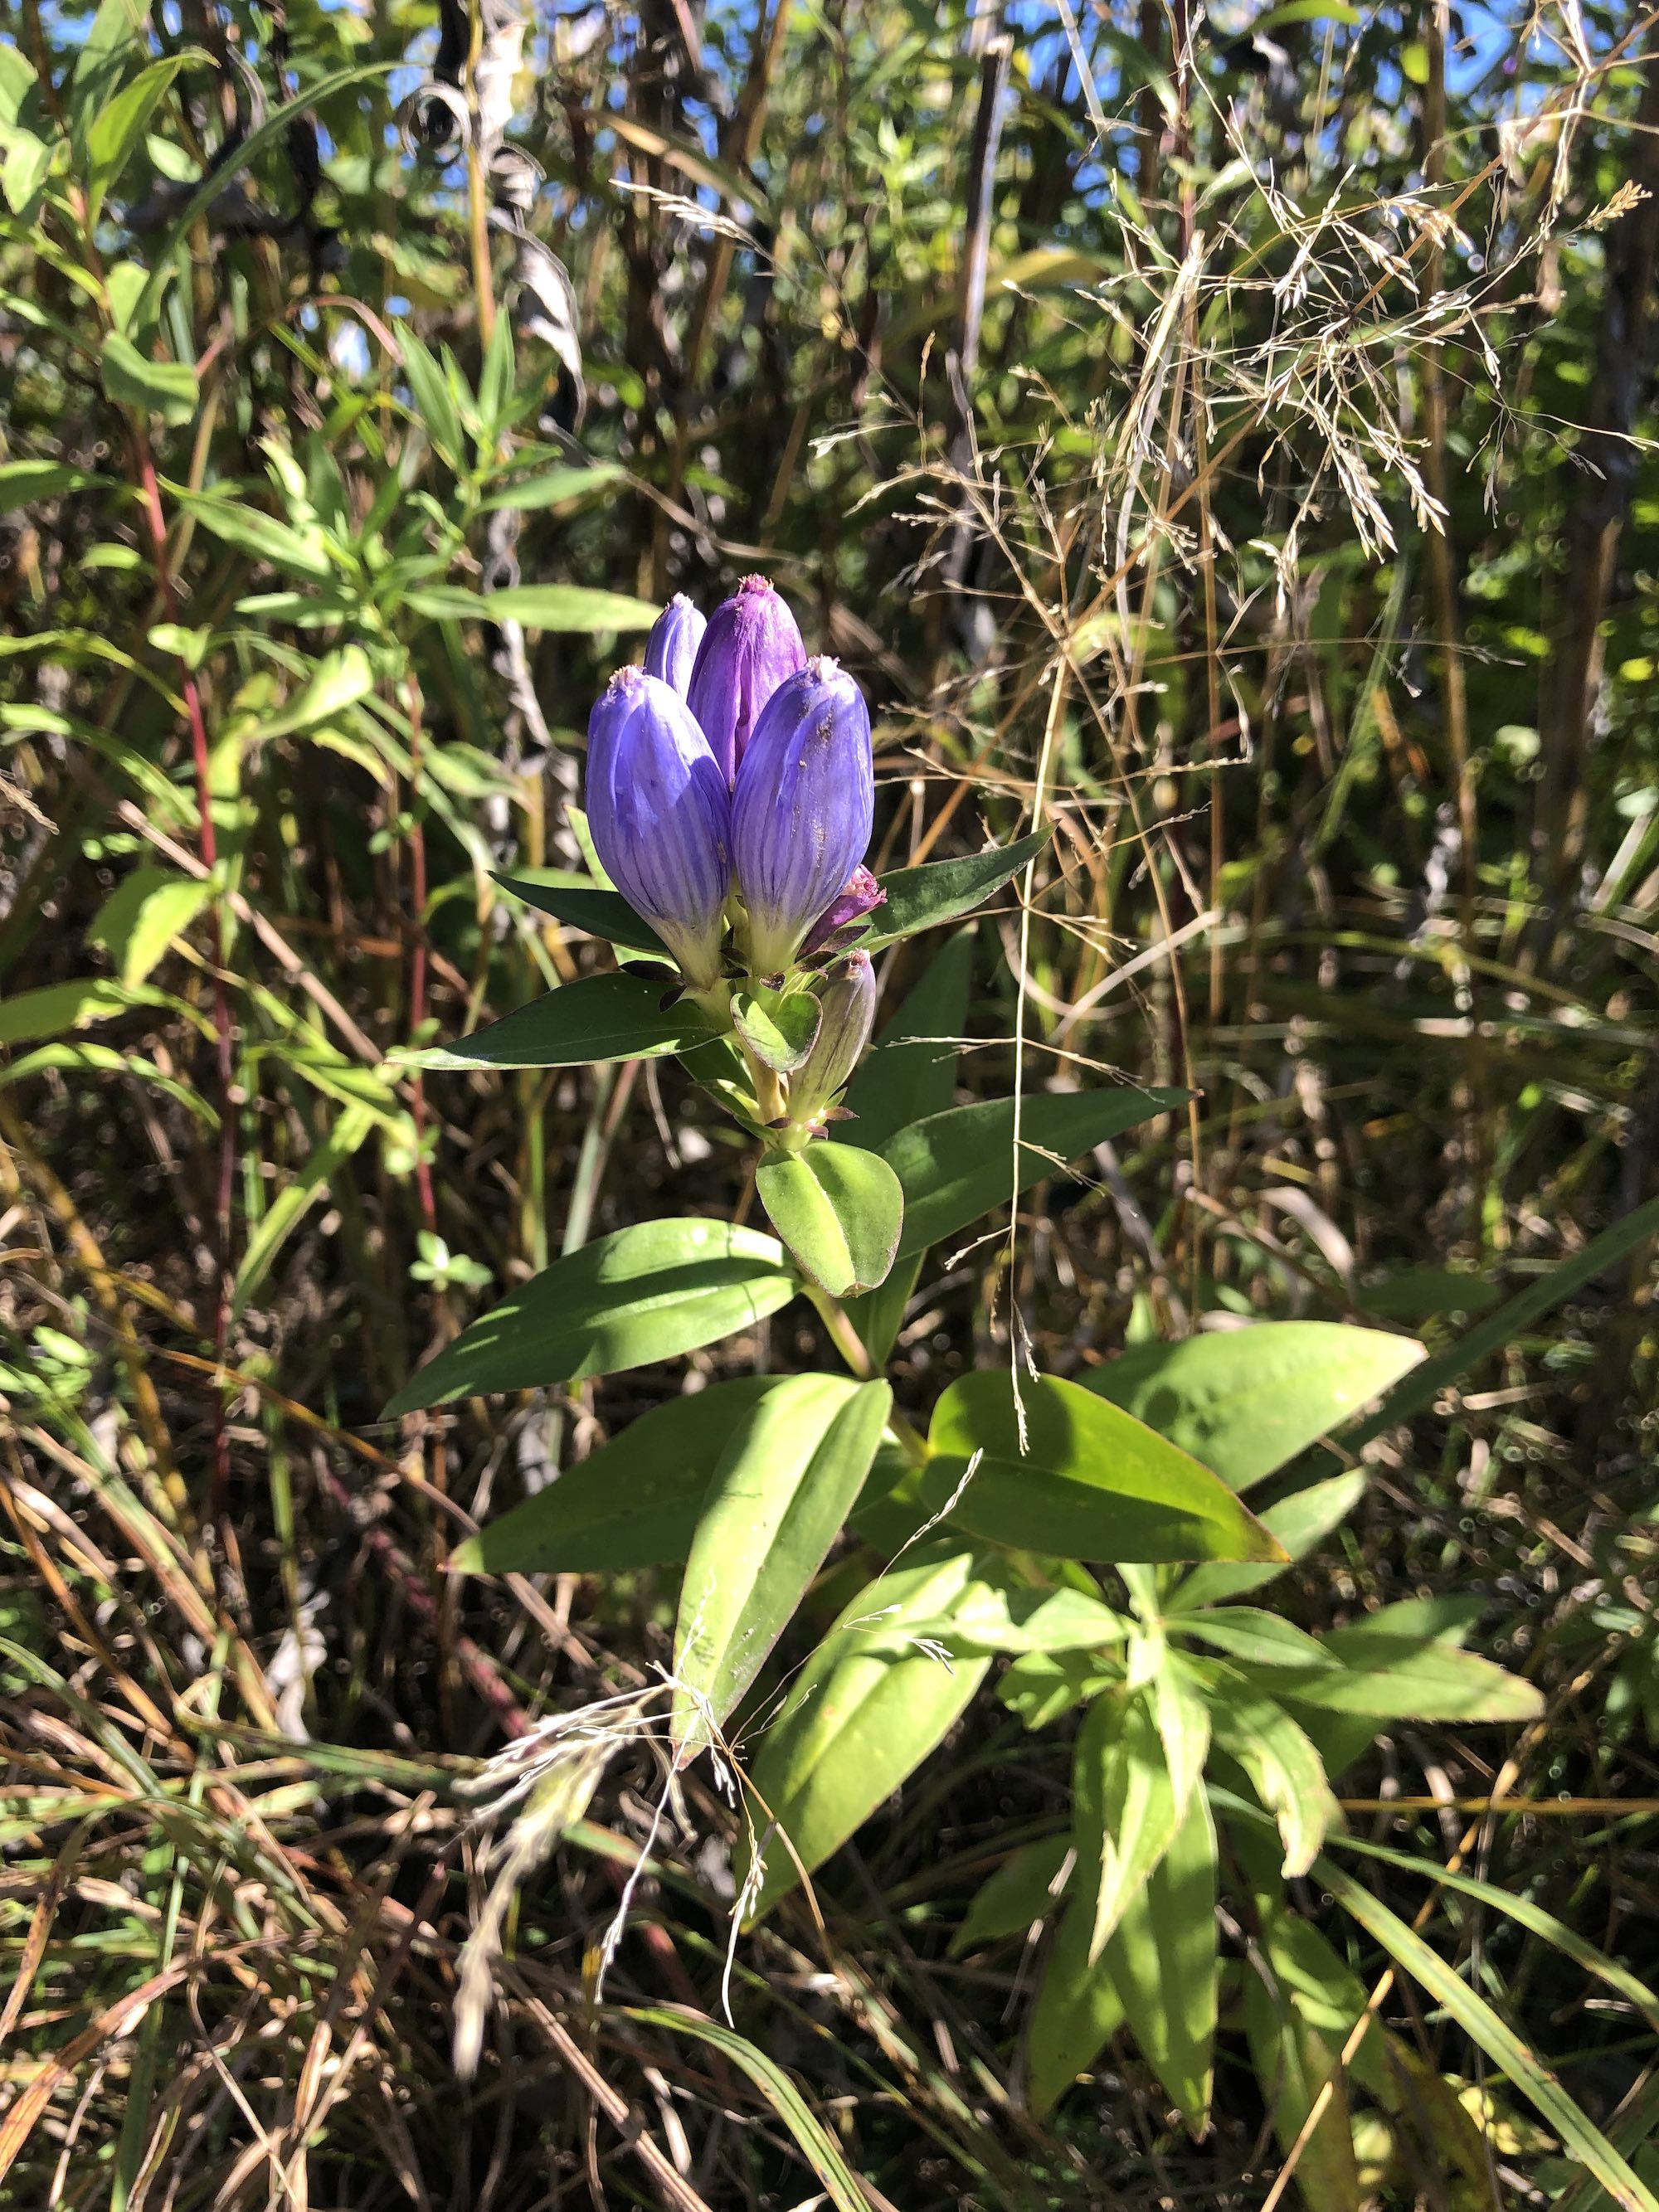 Closed Gentian at the edge of the UW Arboretum Curtis Prairie on the side of a service road on September 28, 2022.